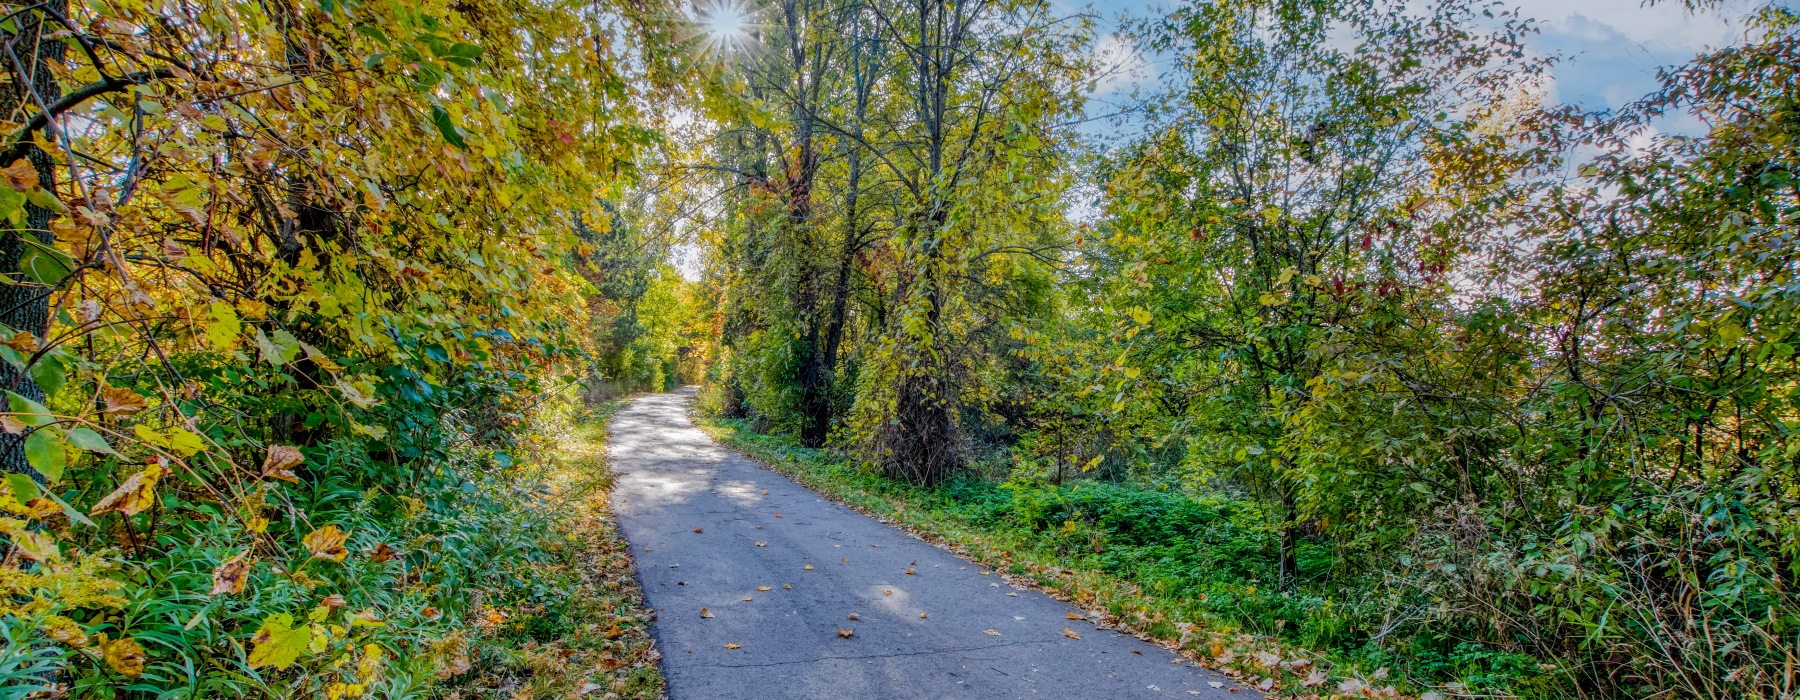 Paved walking and biking trails in the woods